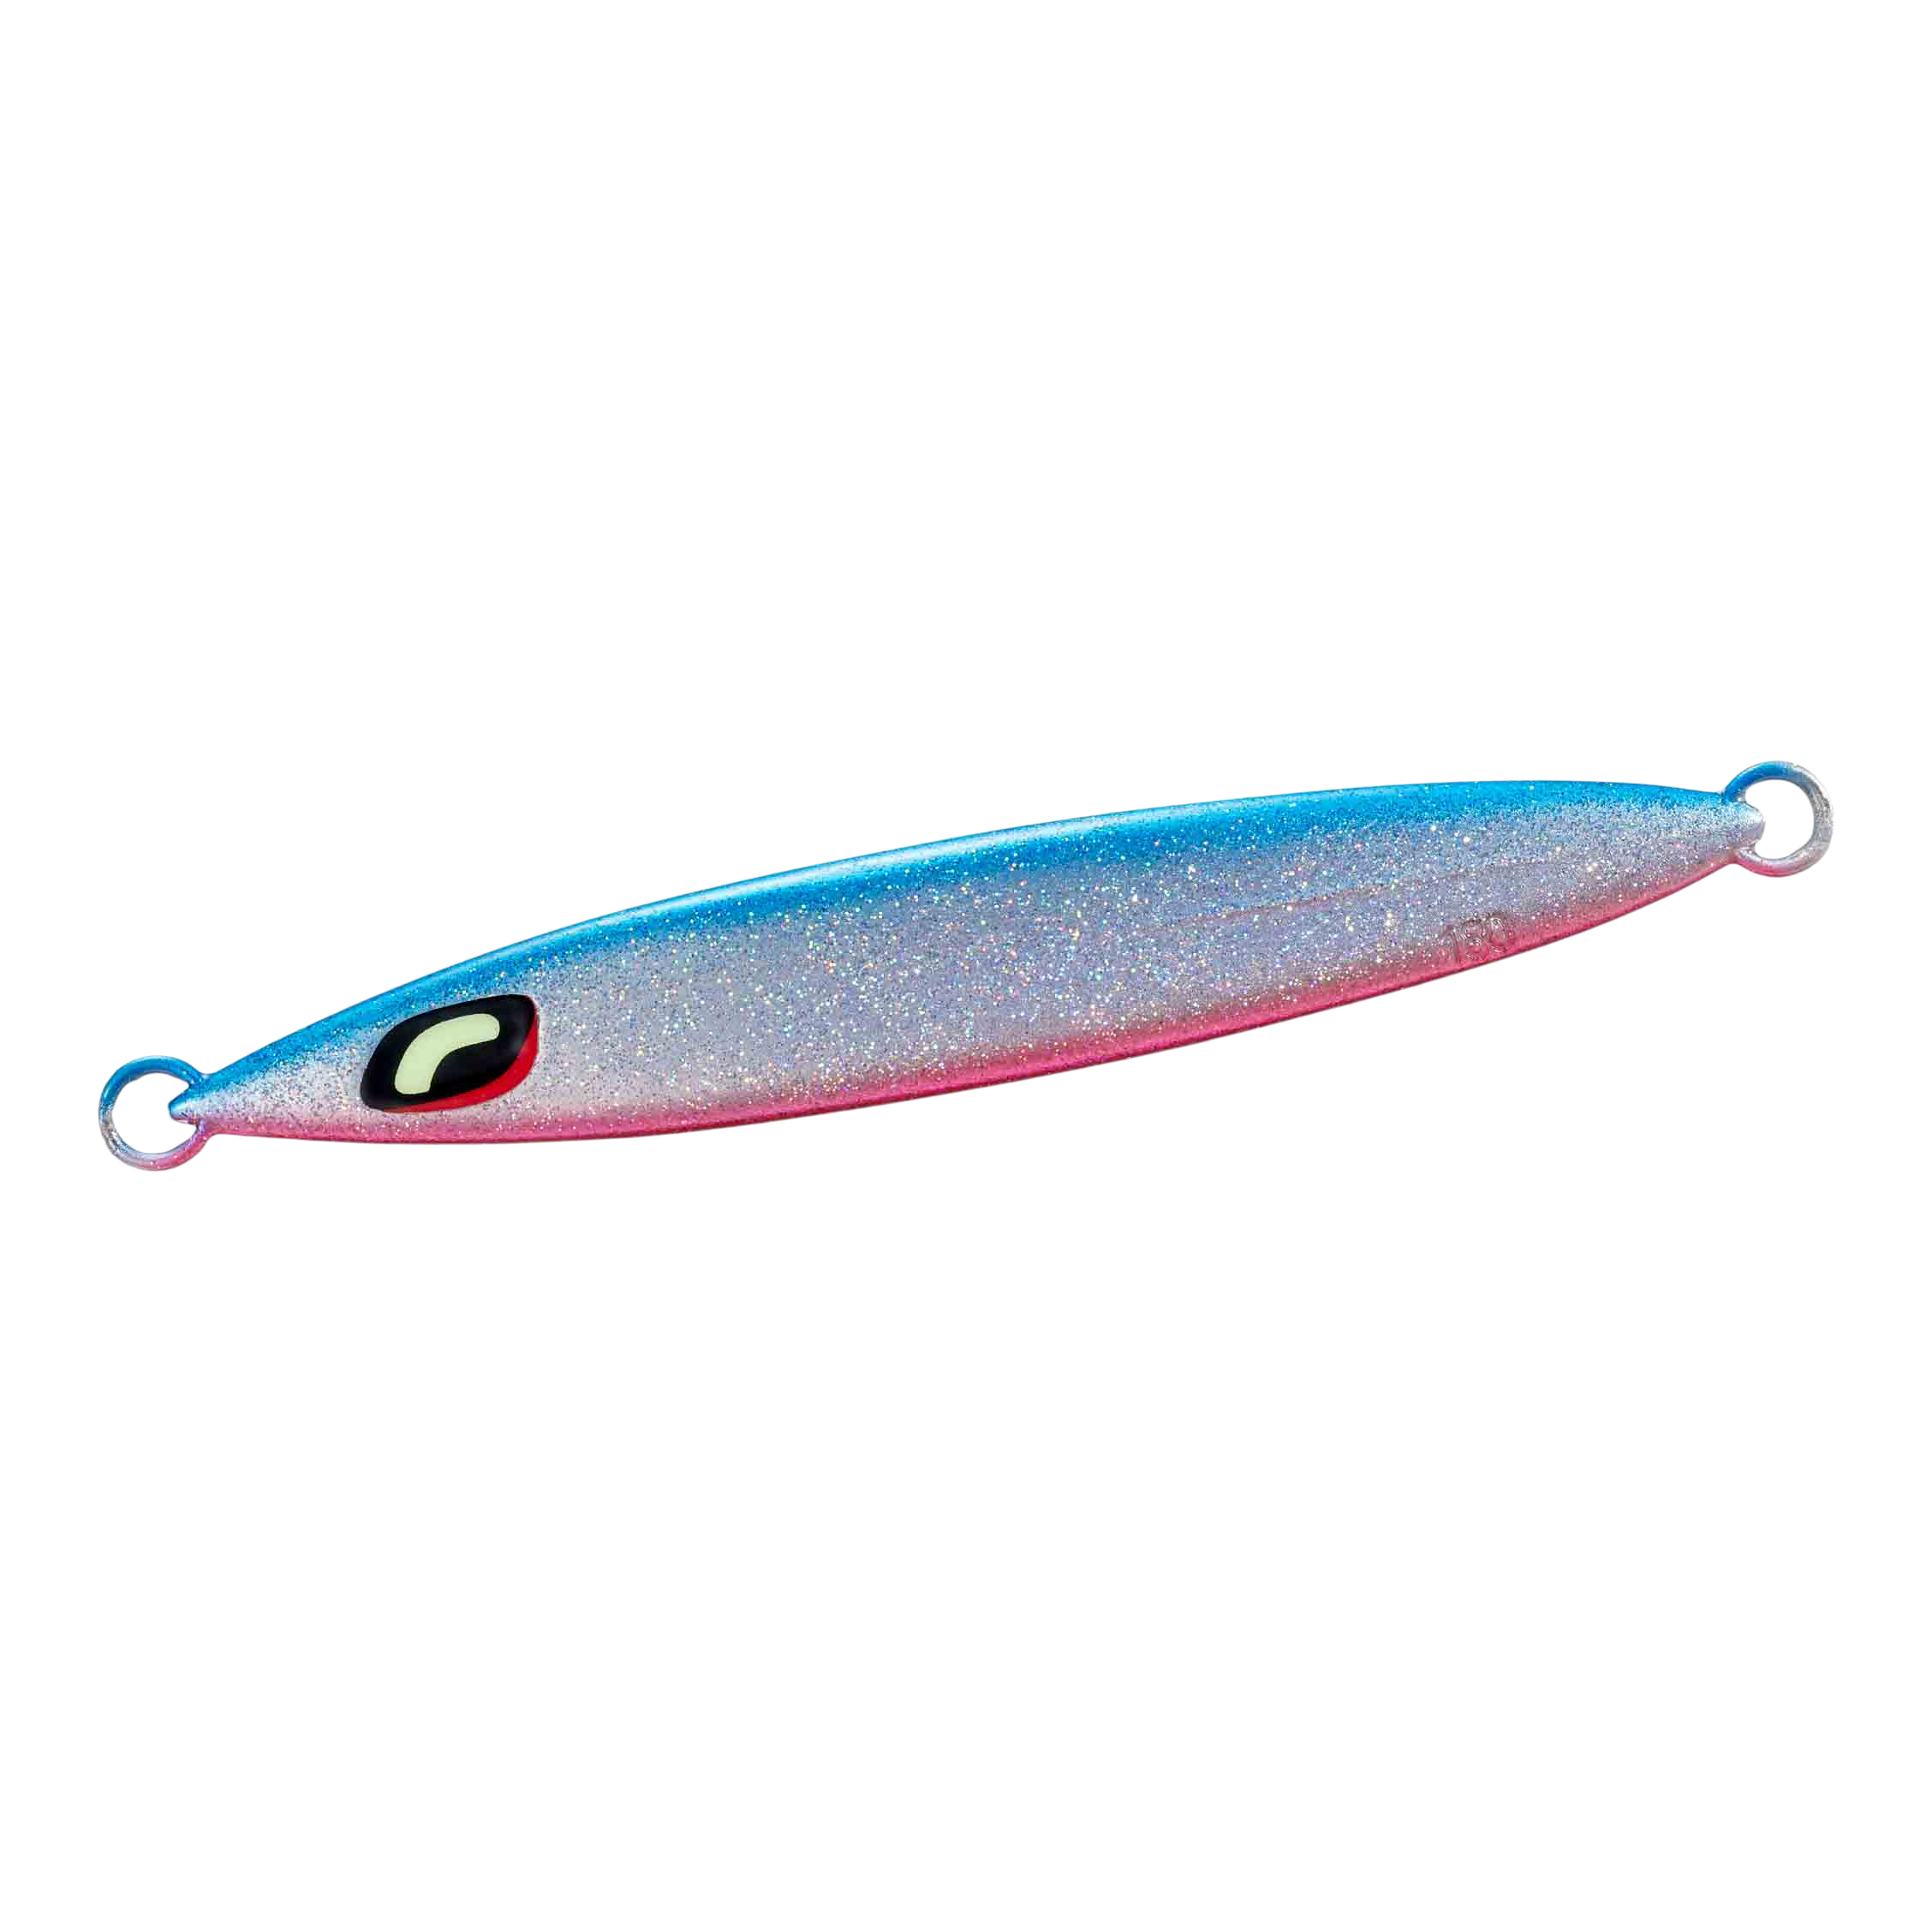 Components and Tools for making fishing lures - Game Fishing Lures